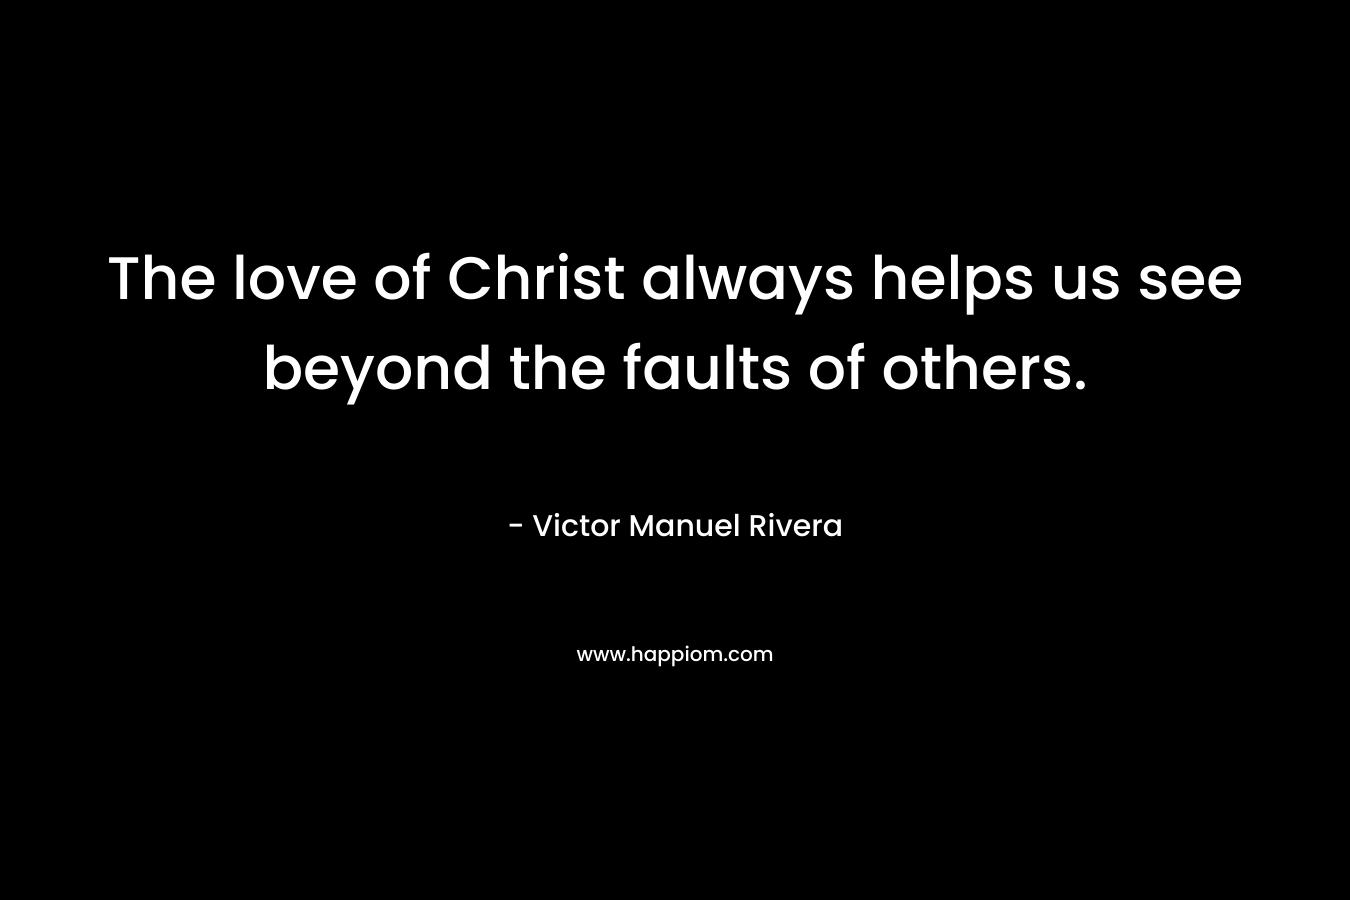 The love of Christ always helps us see beyond the faults of others.